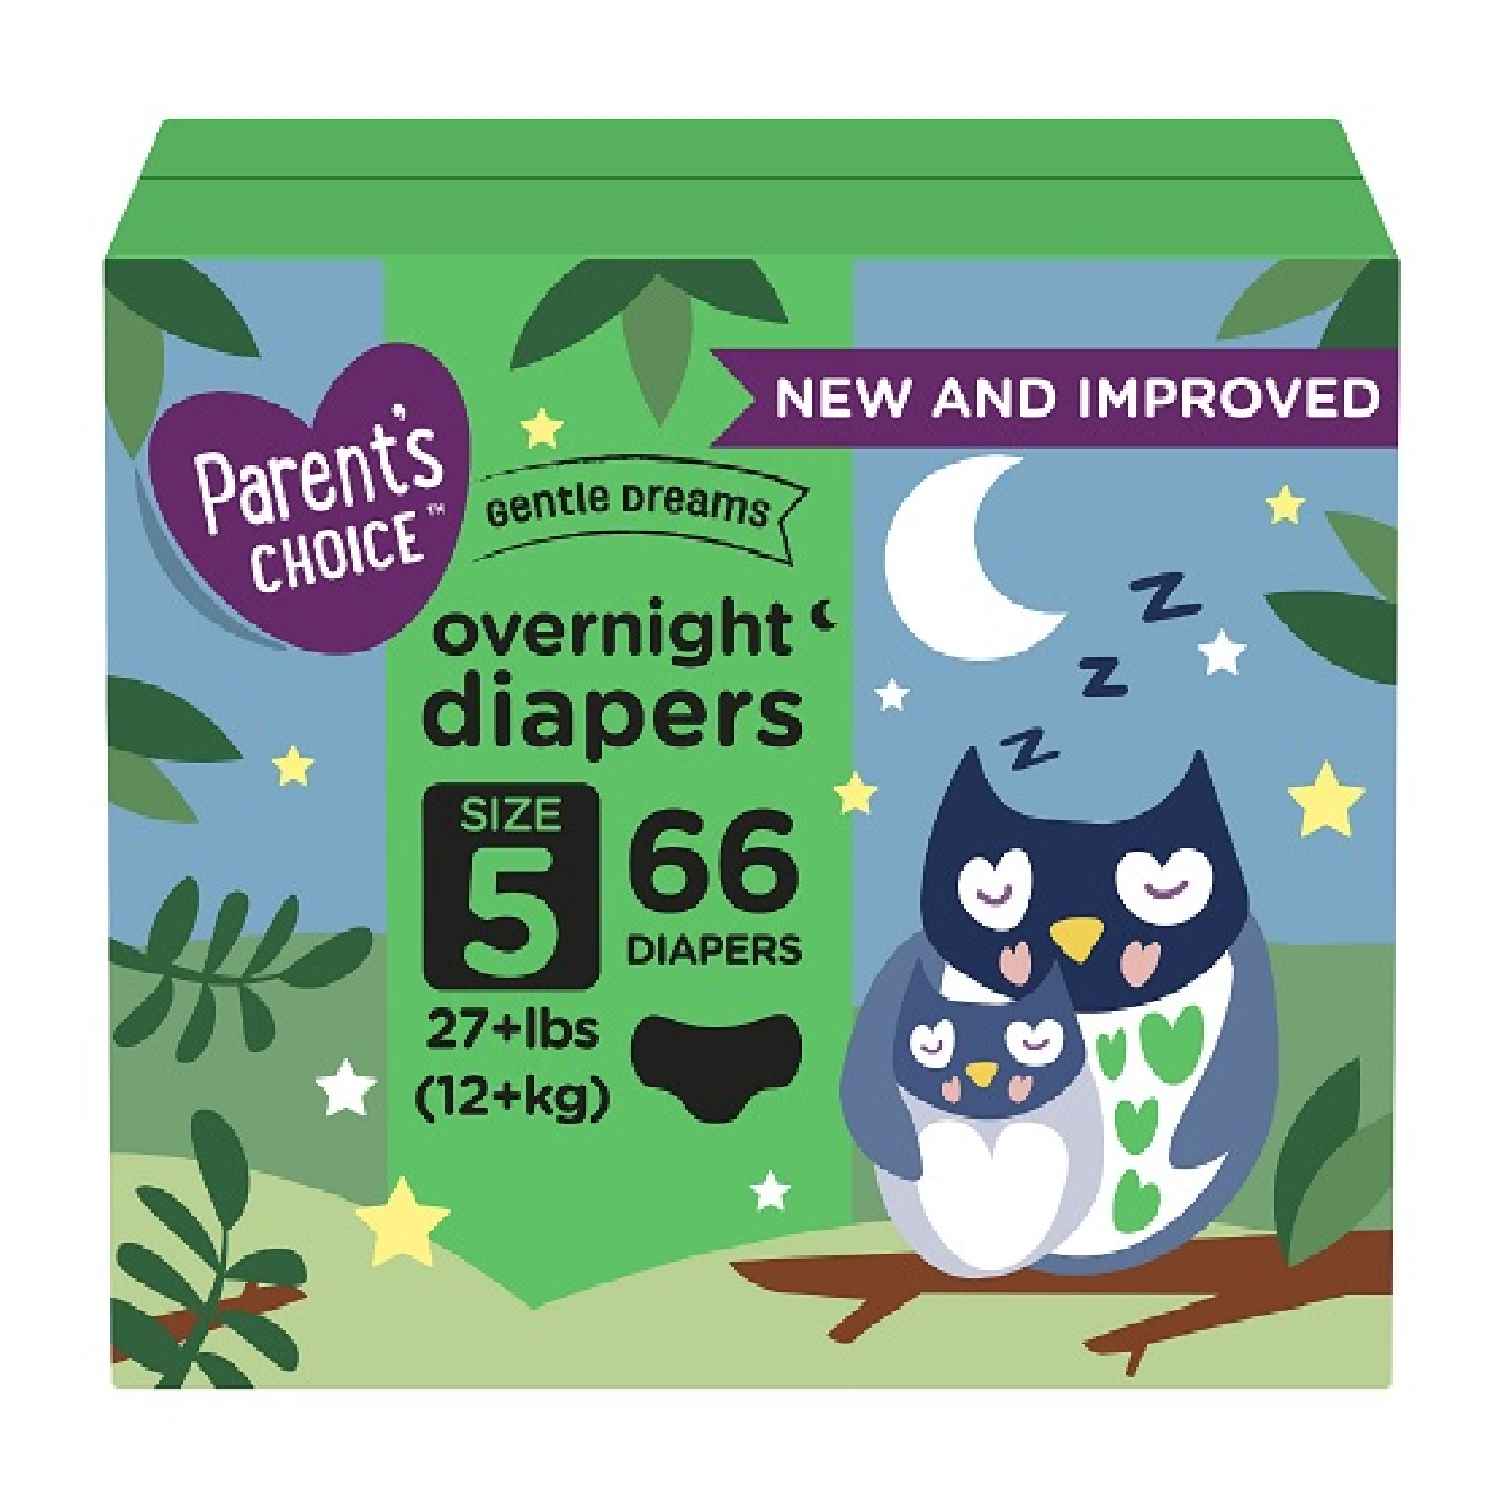 Parent's Choice Gentle Dreams Overnight Diapers, Size 5 66 Pcs - image 1 of 2